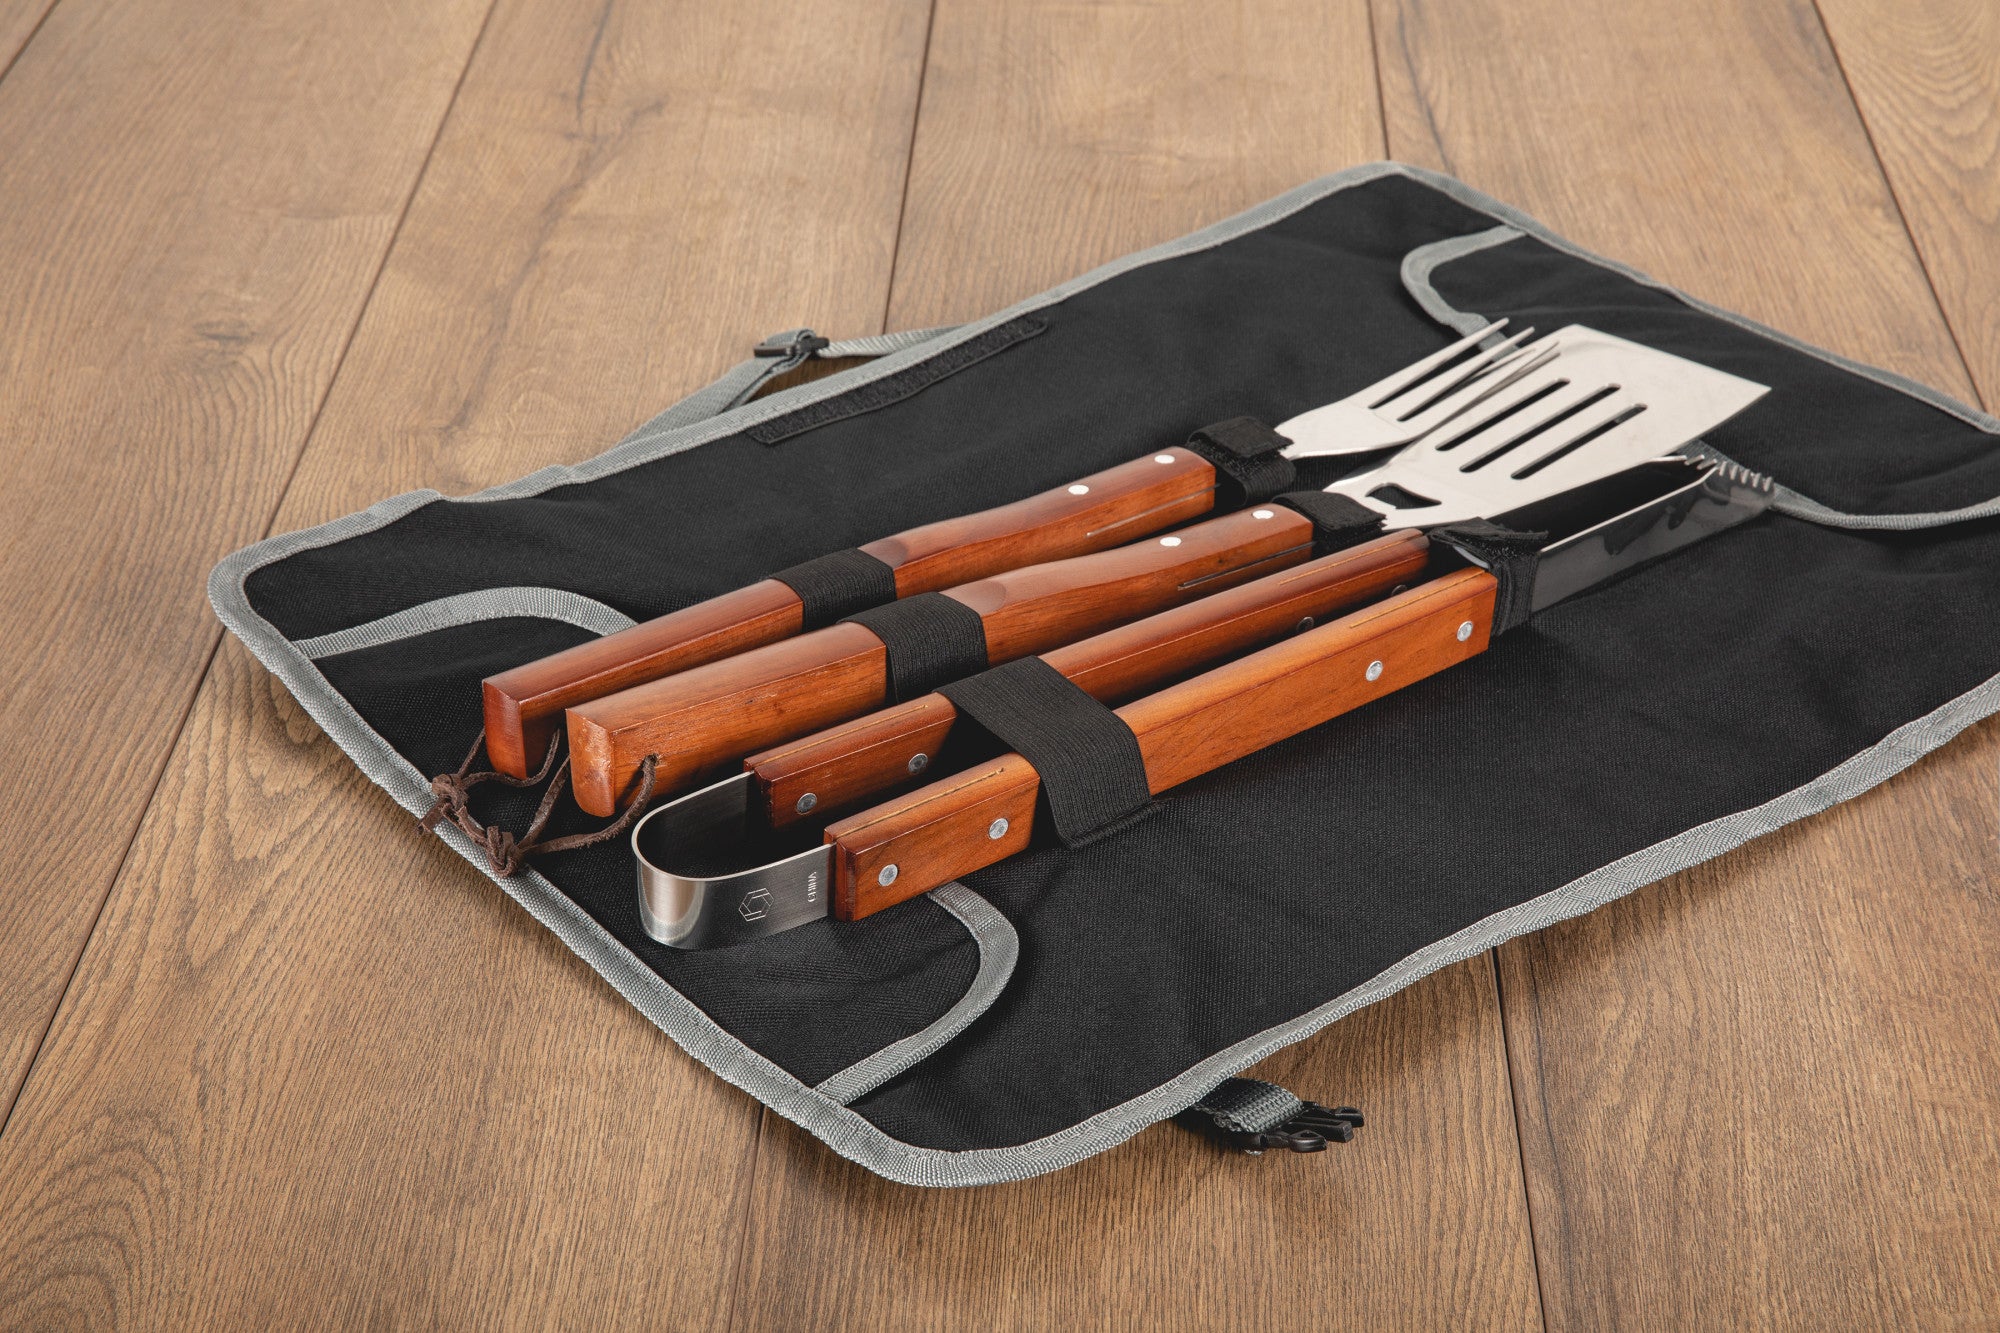 Chicago White Sox - 3-Piece BBQ Tote & Grill Set